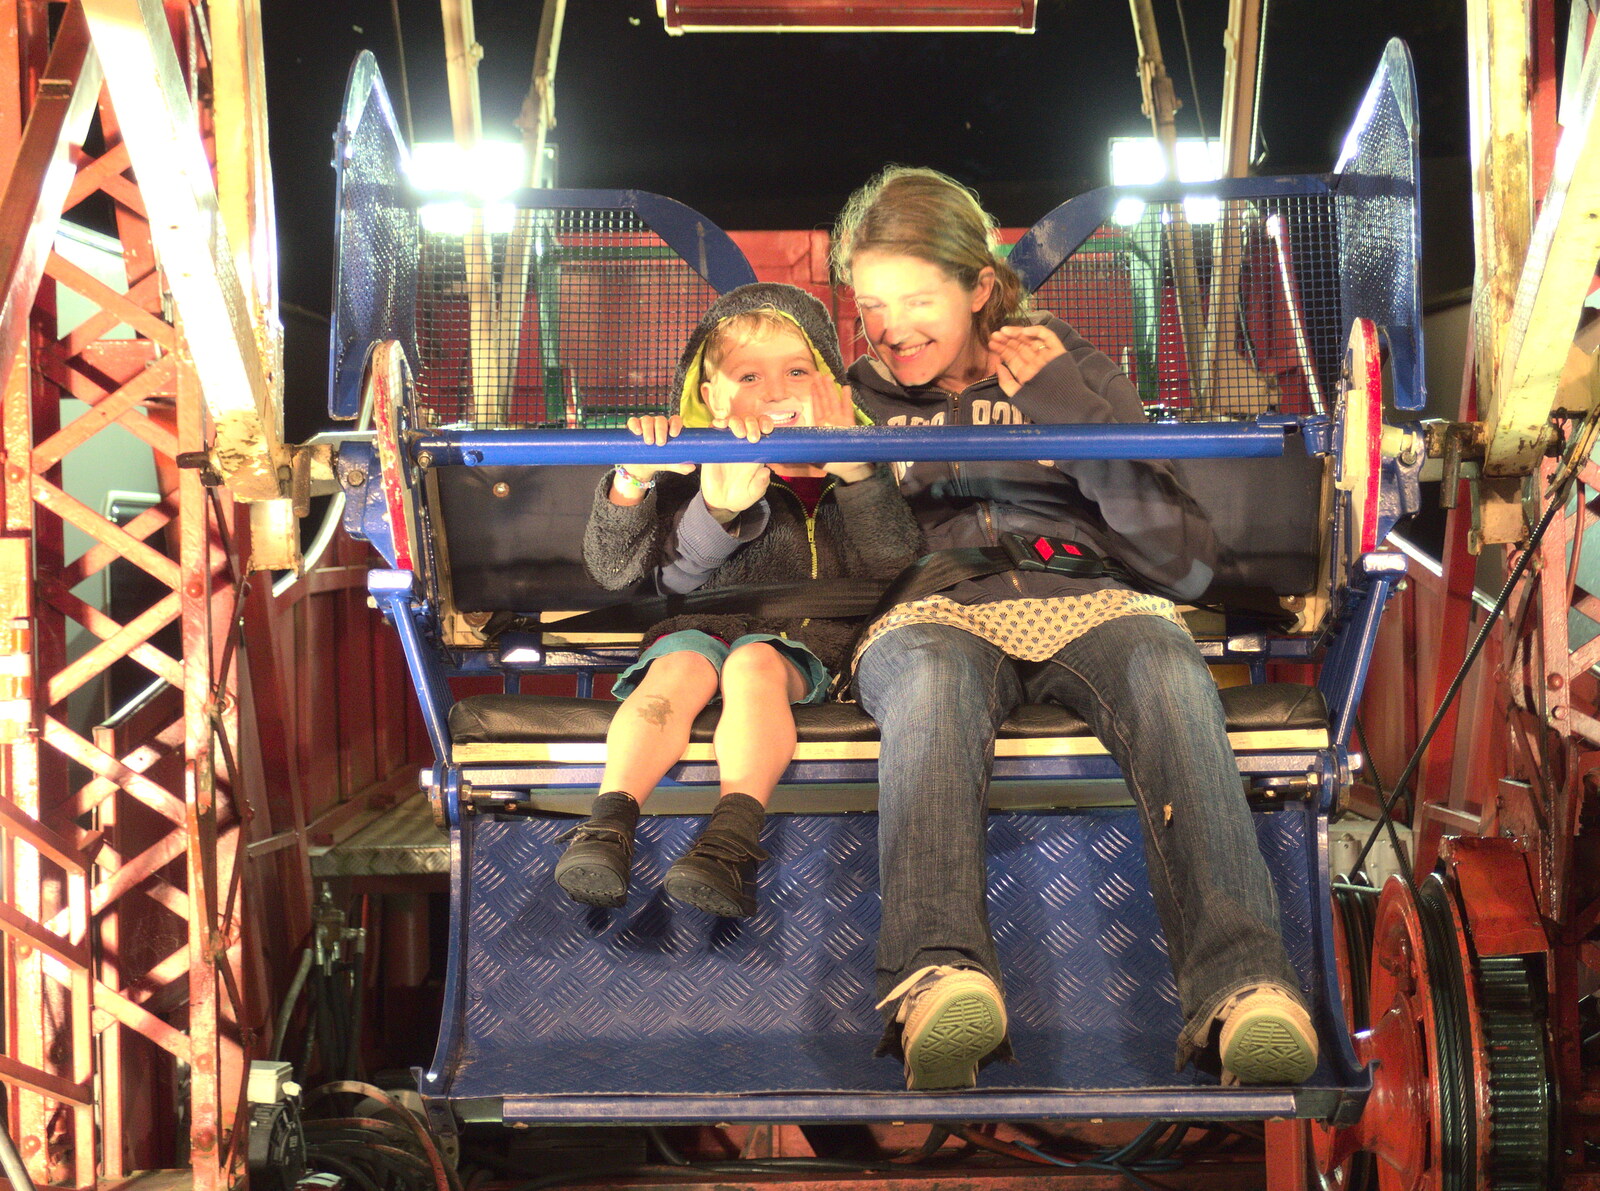 Fred and Isobel go round the wheel from Latitude Festival, Henham Park, Southwold, Suffolk - 17th July 2014